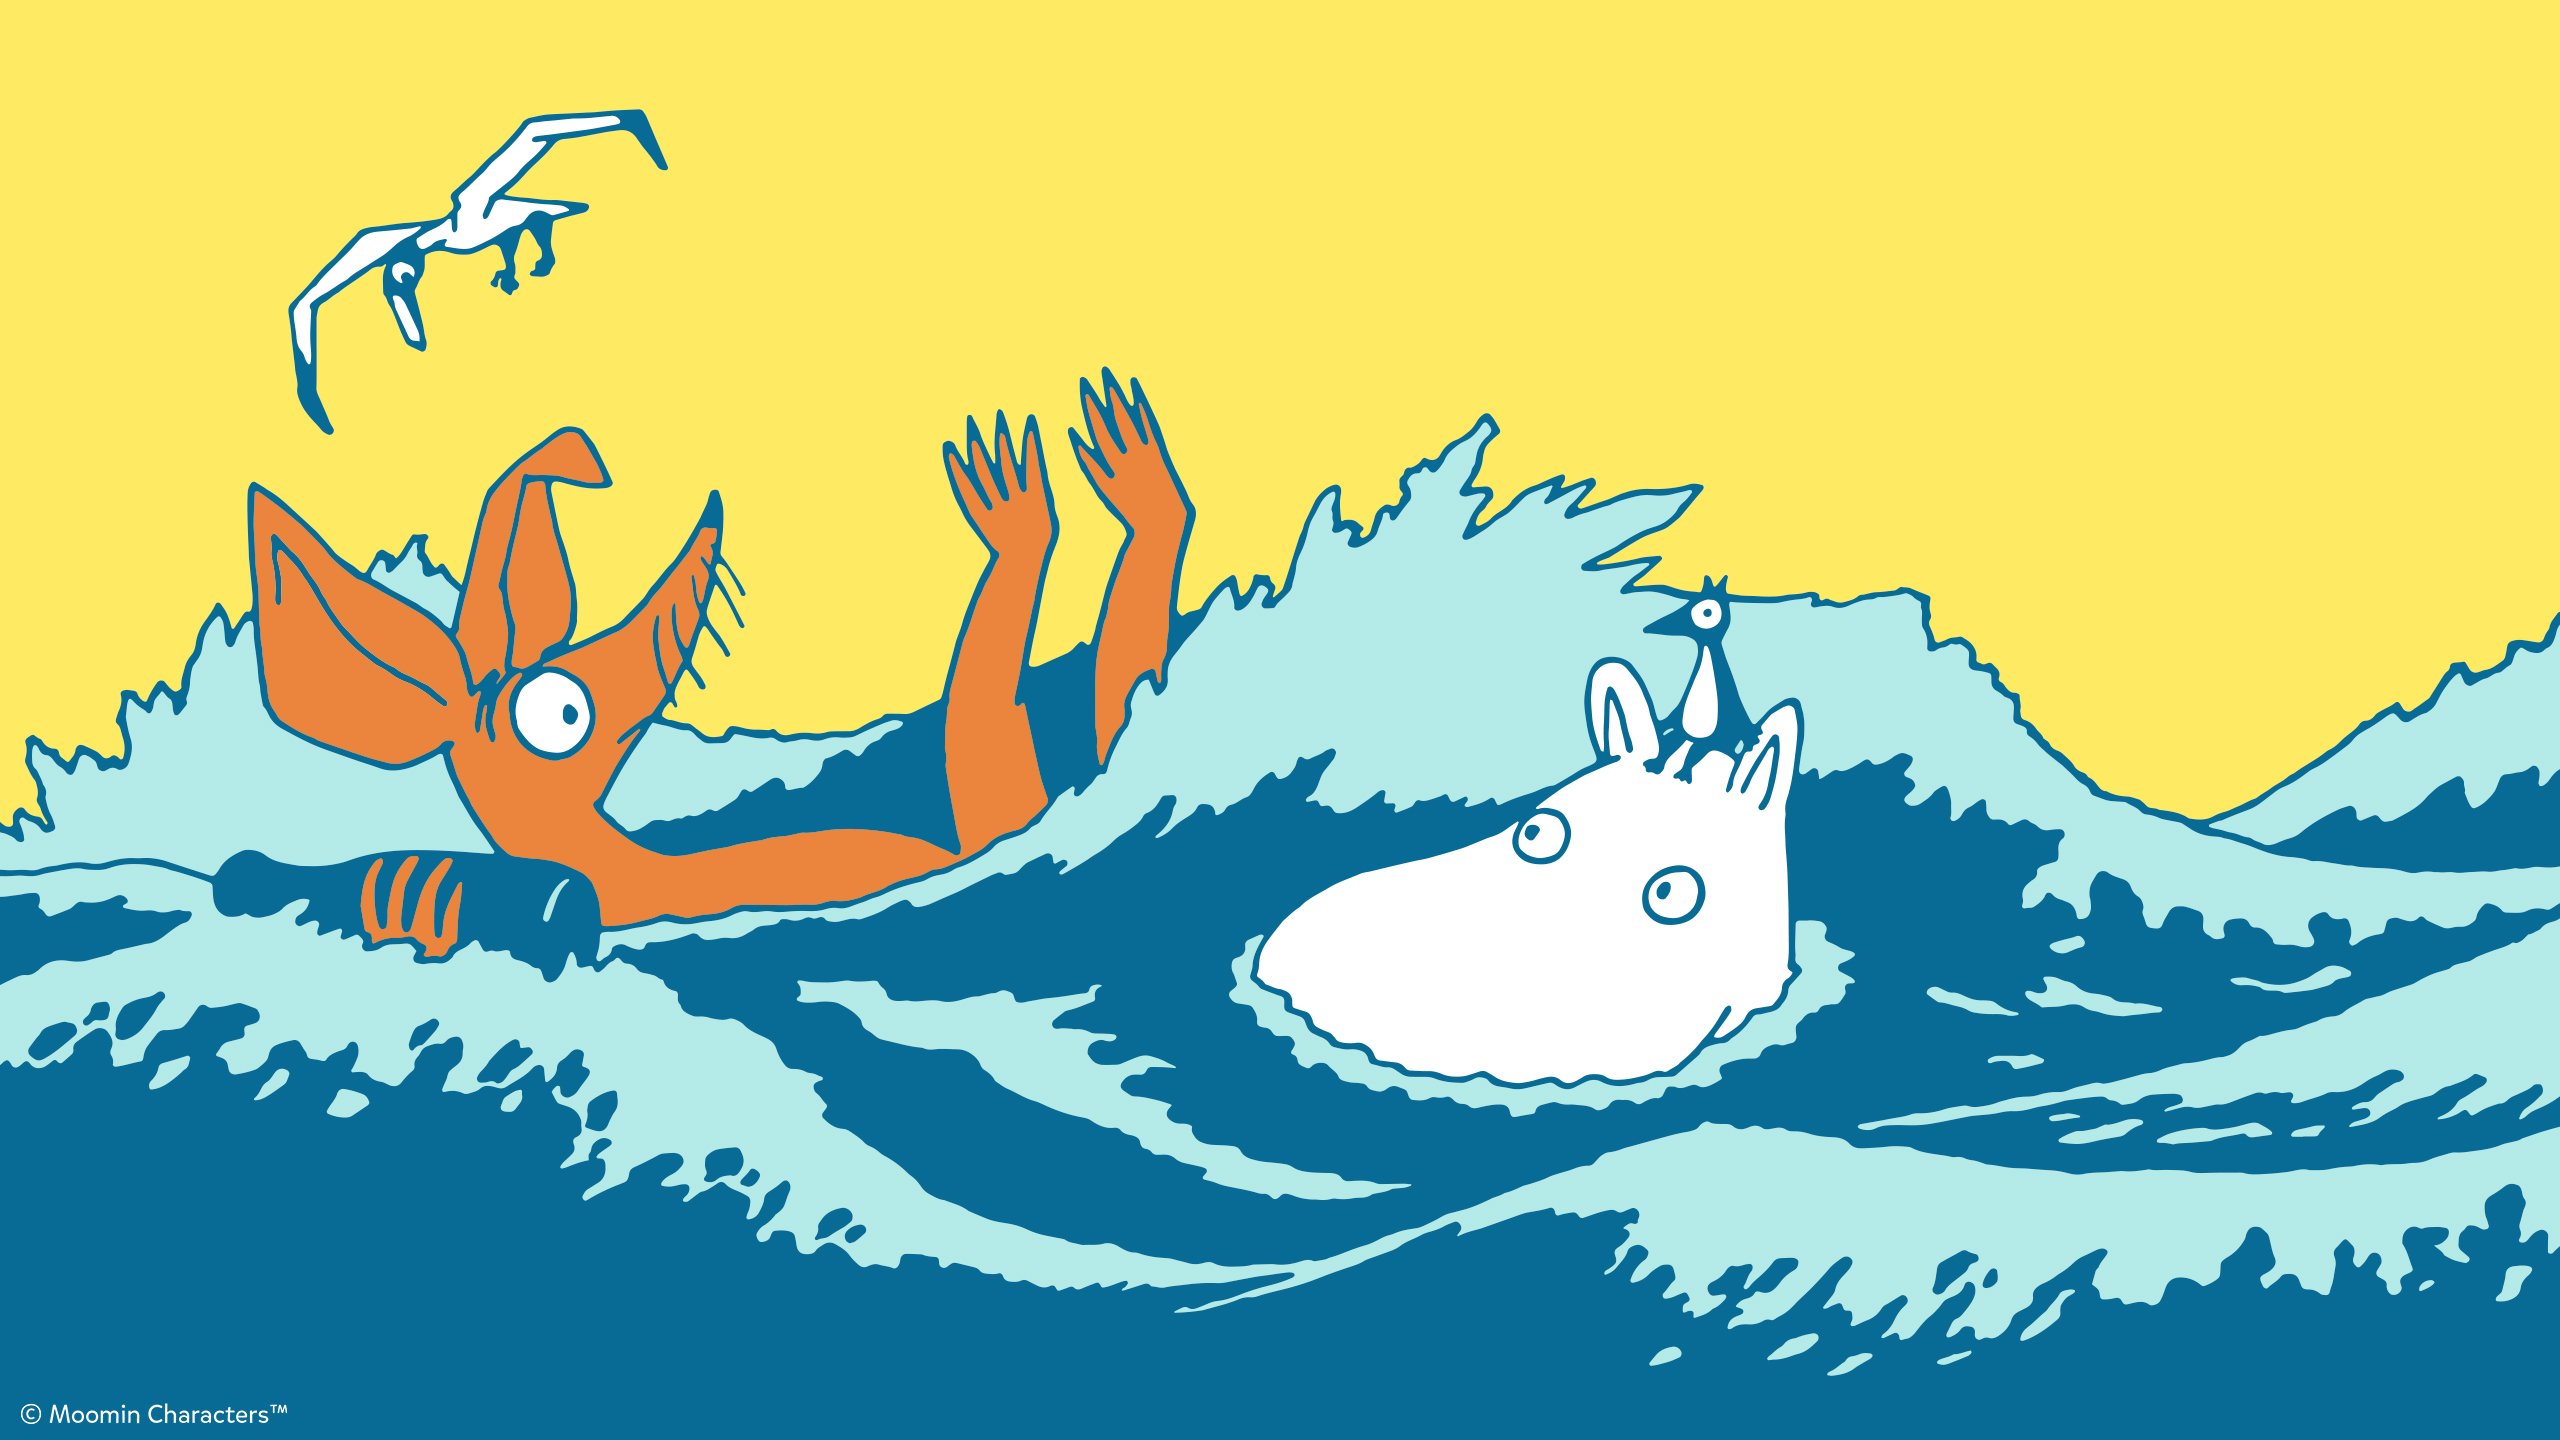 Show your support for OURSEA with free Moomin wallpapers